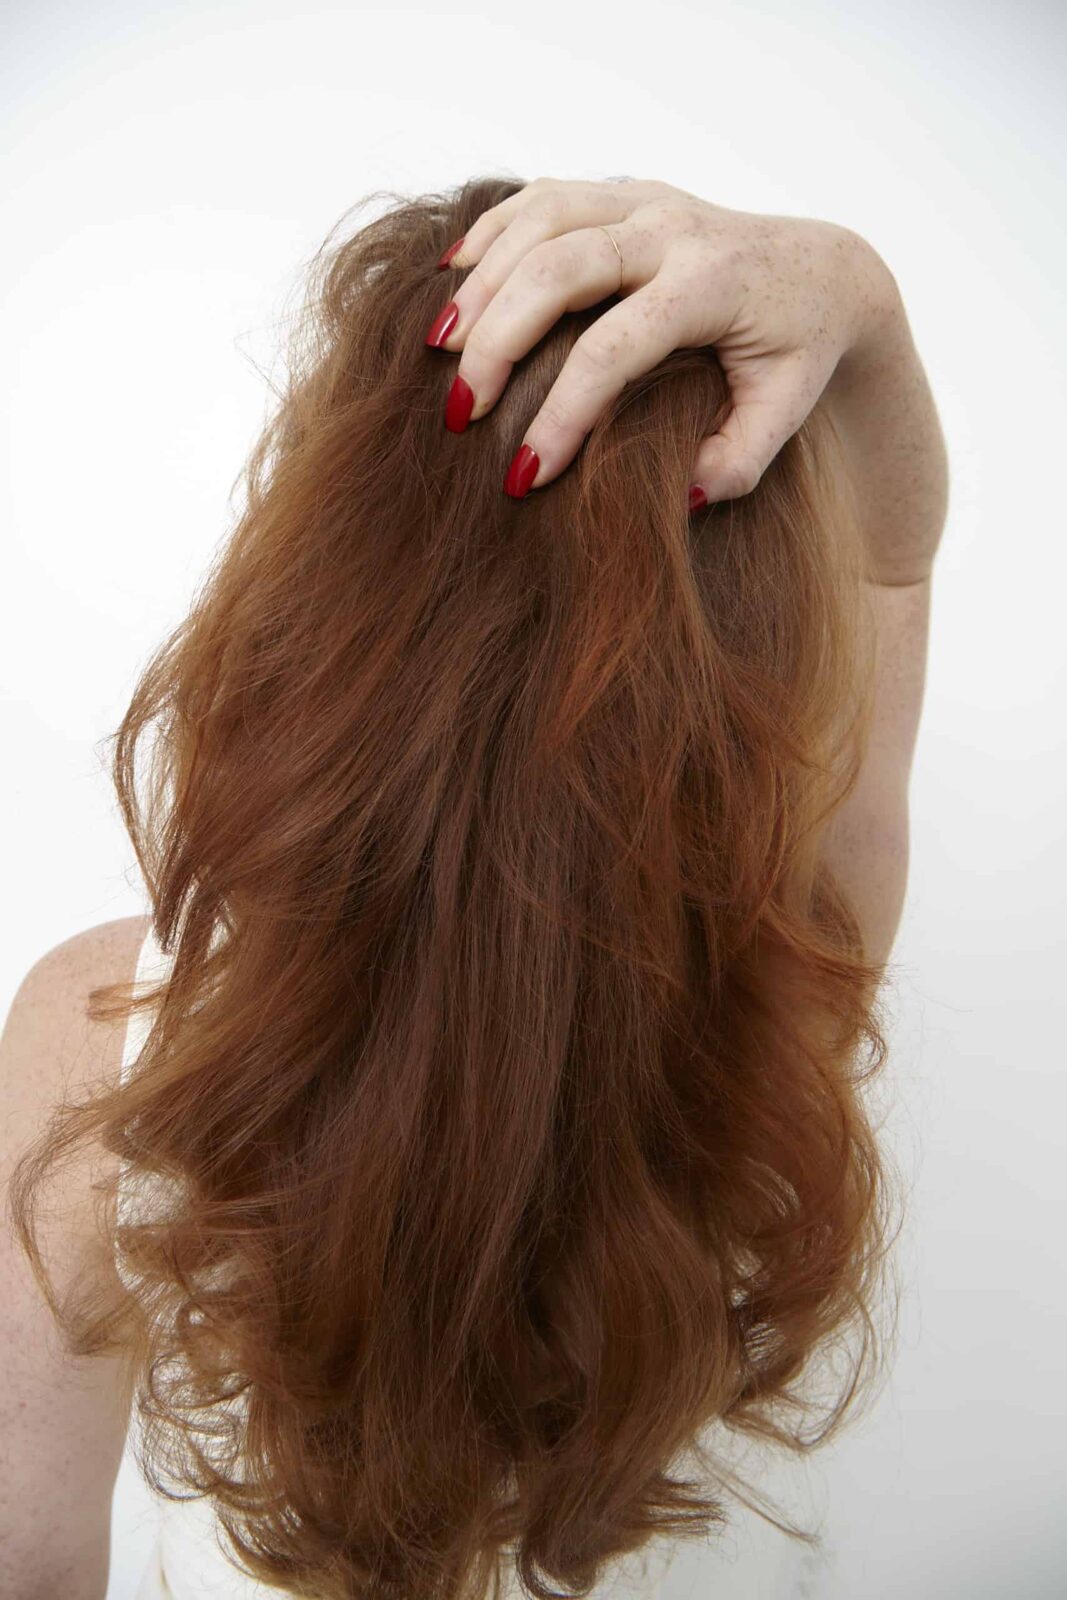 Can Hot Water Fade Your Red Hair? The Answer Will Shock You - H2BAR